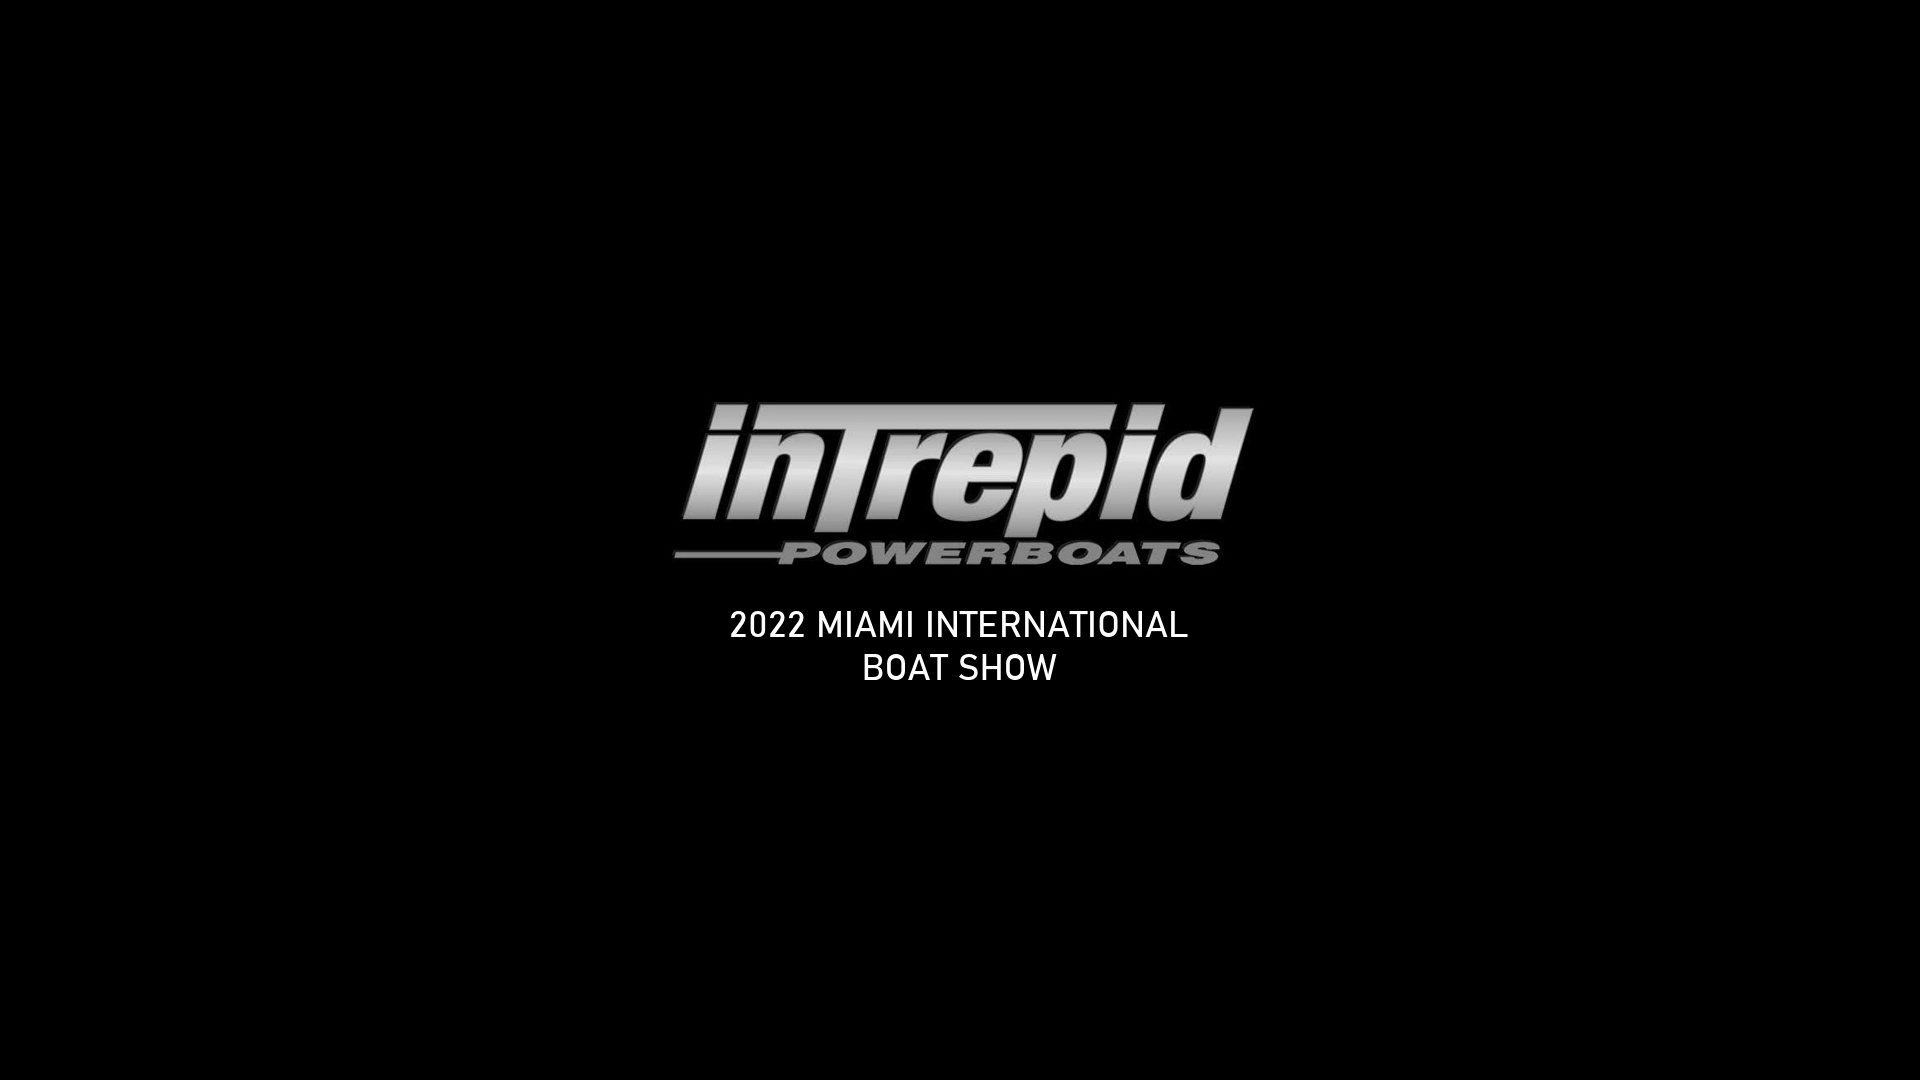 360 VR Virtual Tours of the Intrepid Powerboats @ 2022 Miami International Boat Show